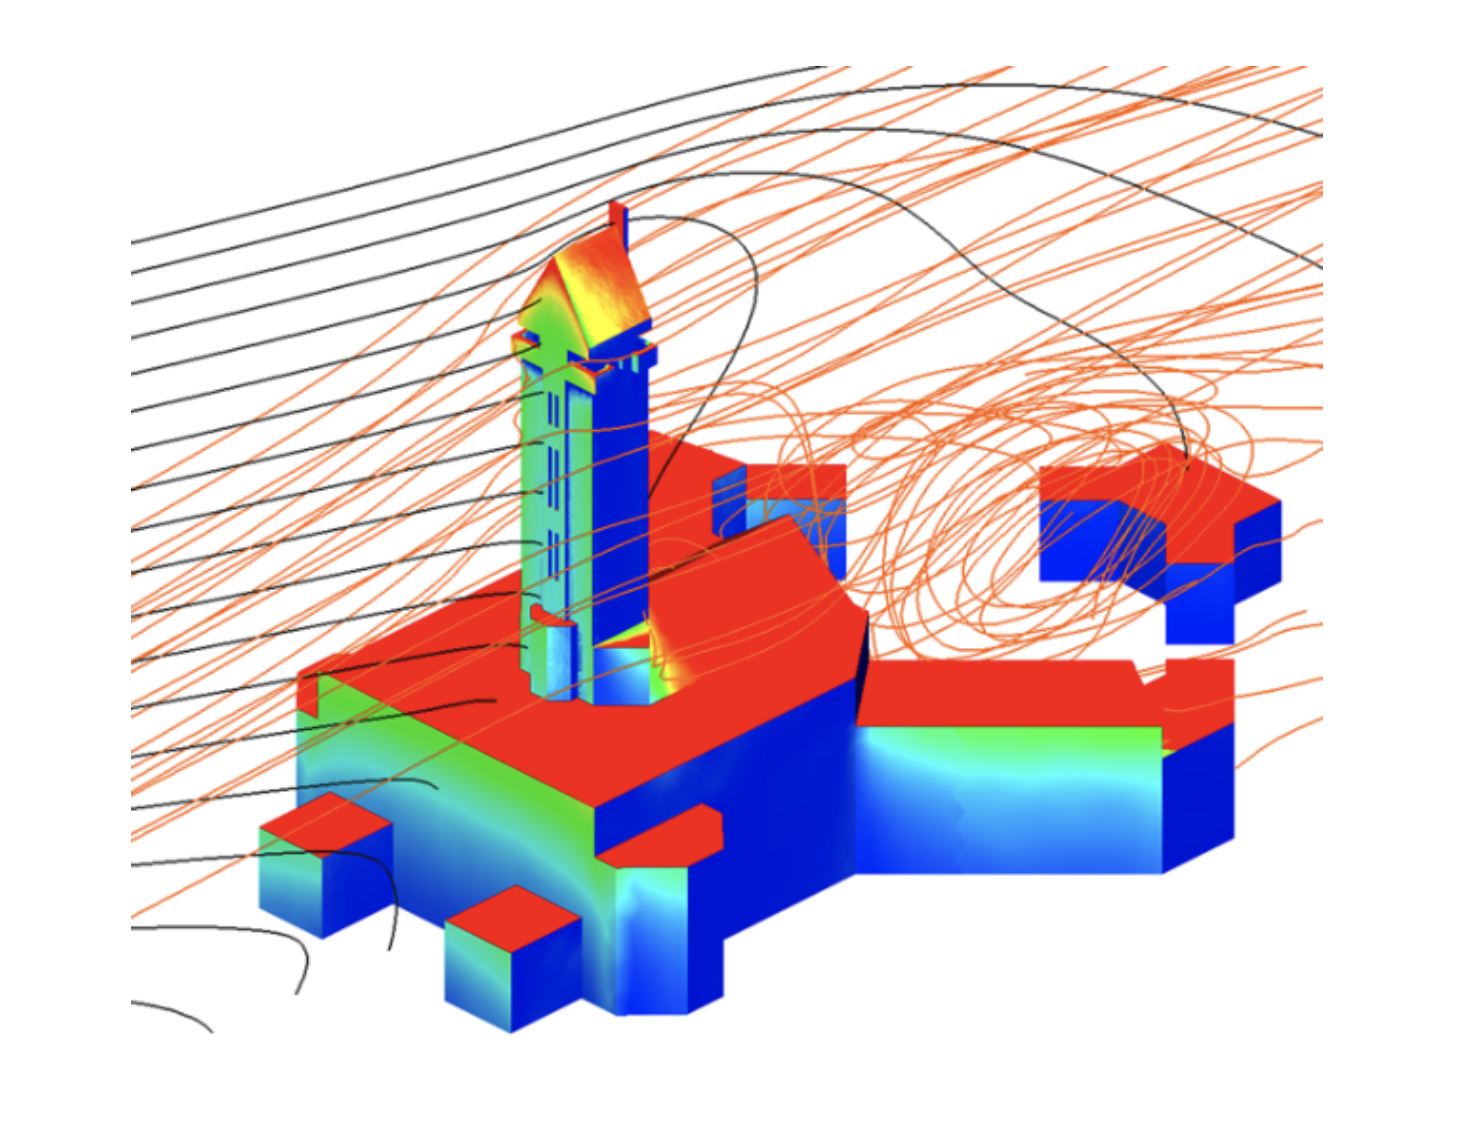 Wetting distribution due to wind-driven rain on historical building (St. Hubertus Hunting Lodge, The Netherlands – Building geometry provided by Prof. Bert Blocken). Orange lines are streamlines of wind flow; black lines are trajectories of raindrops